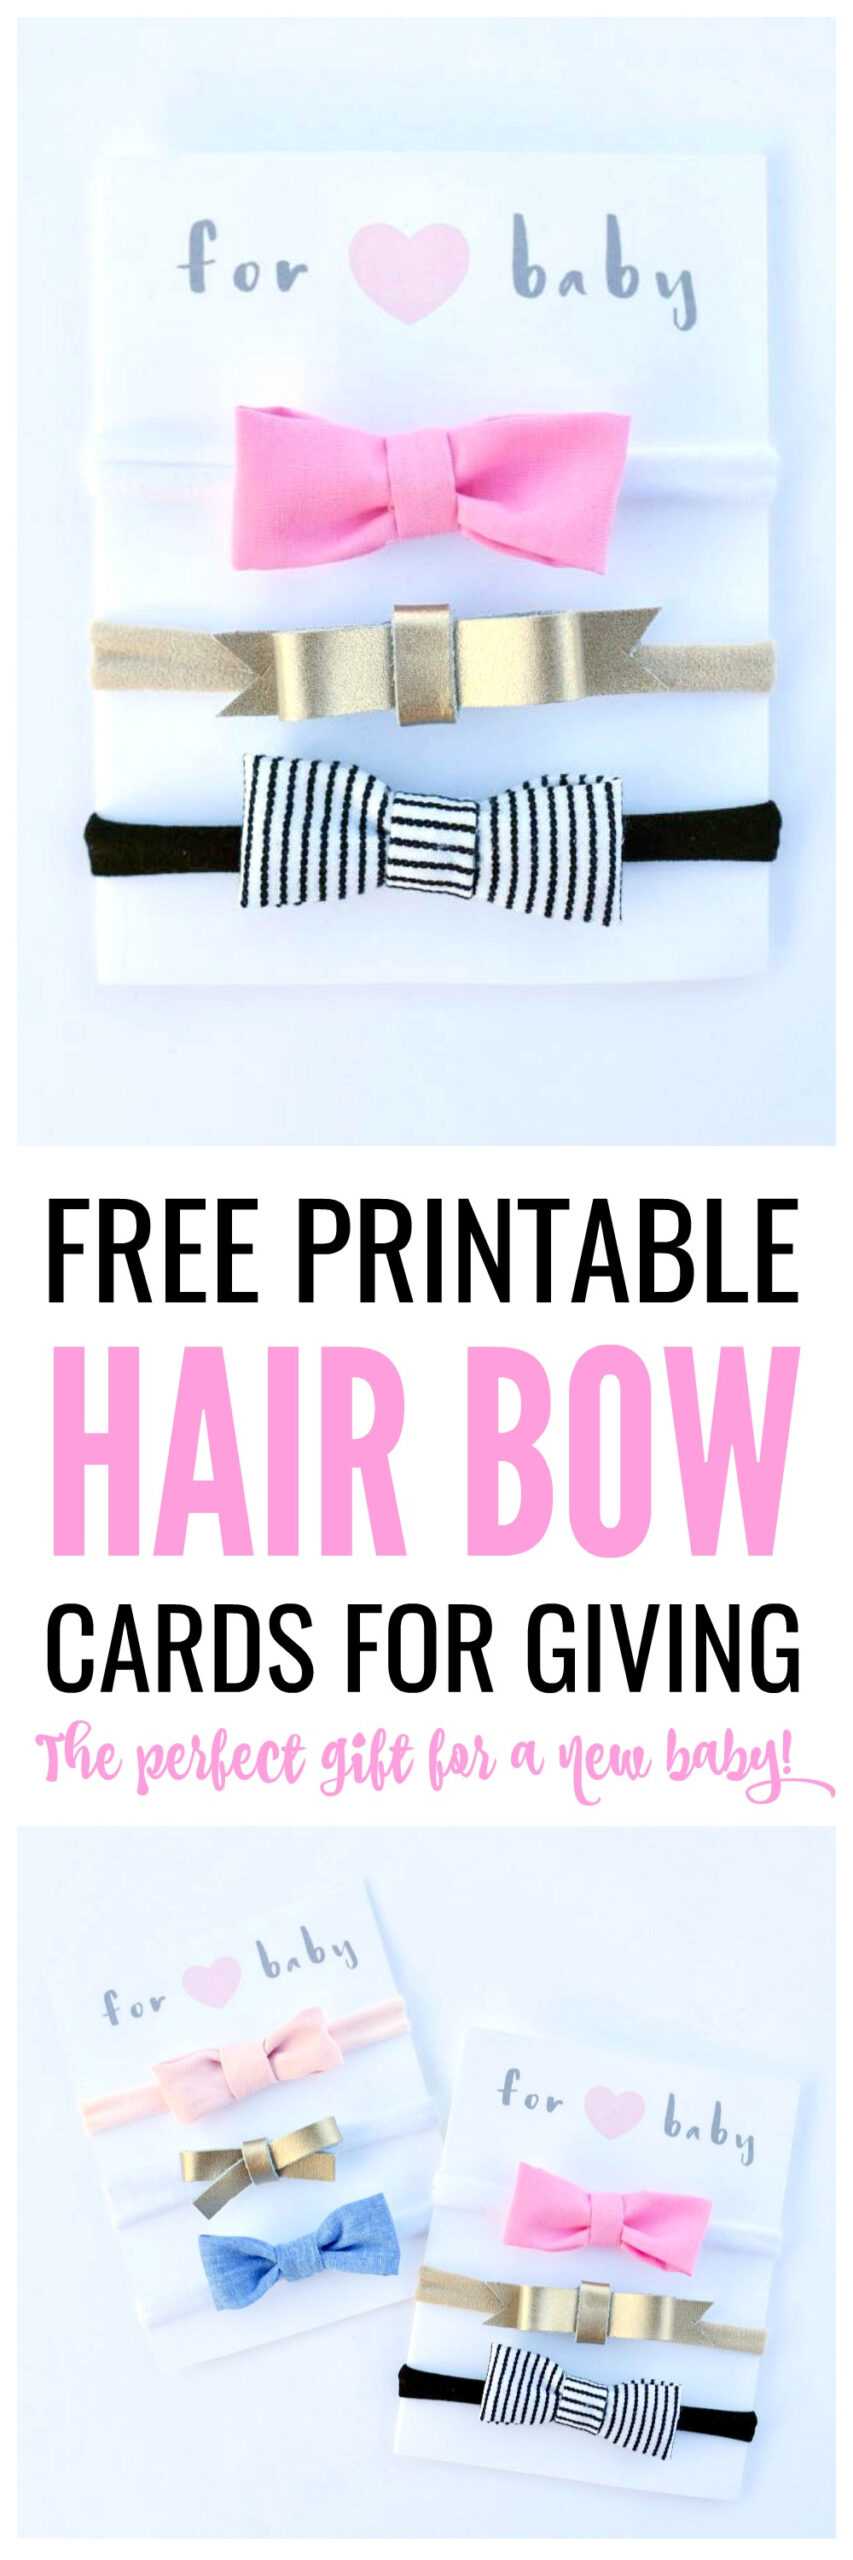 Free Printable Hair Bow Cards For Diy Hair Bows And With Headband Card Template